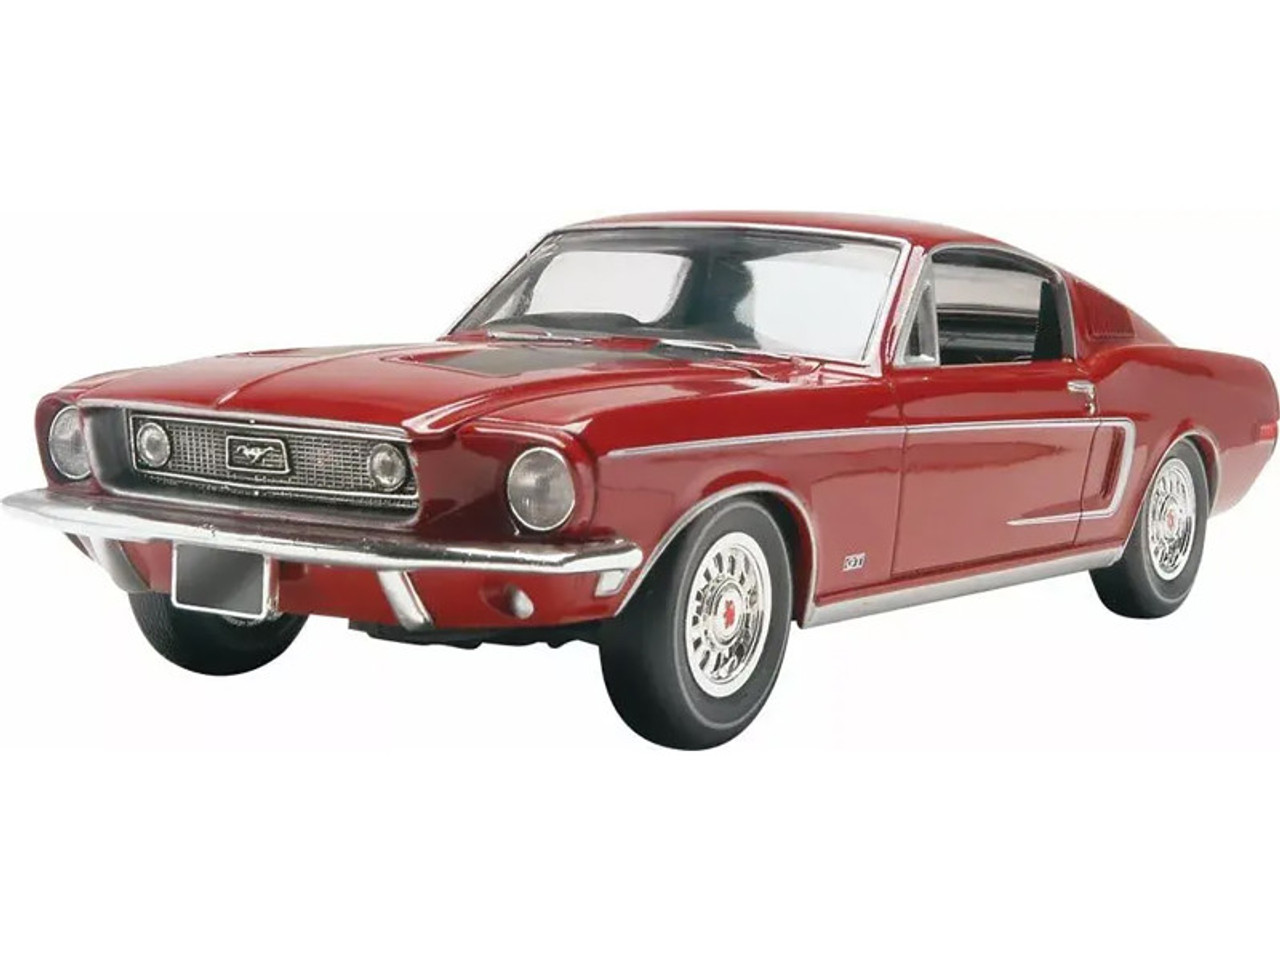 Level 4 Model Kit 1968 Ford Mustang GT 2-in-1 Kit "Revell Muscle" 1/25 Scale Model by Revell